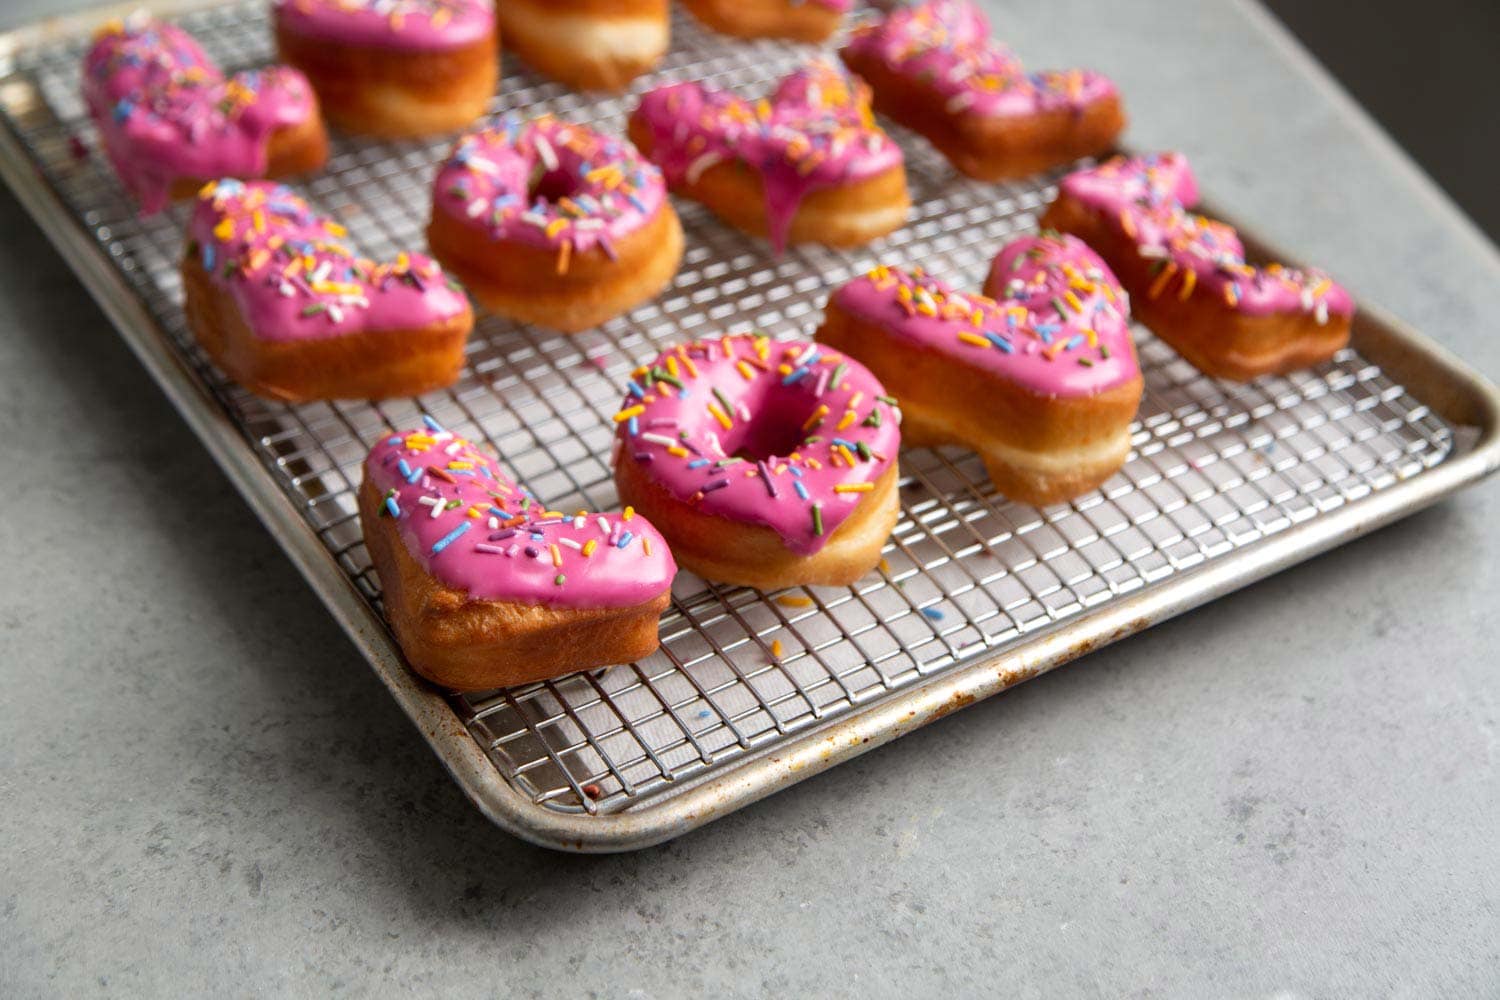 Yeast donuts dipped in pink glaze naturally colored with beet powder